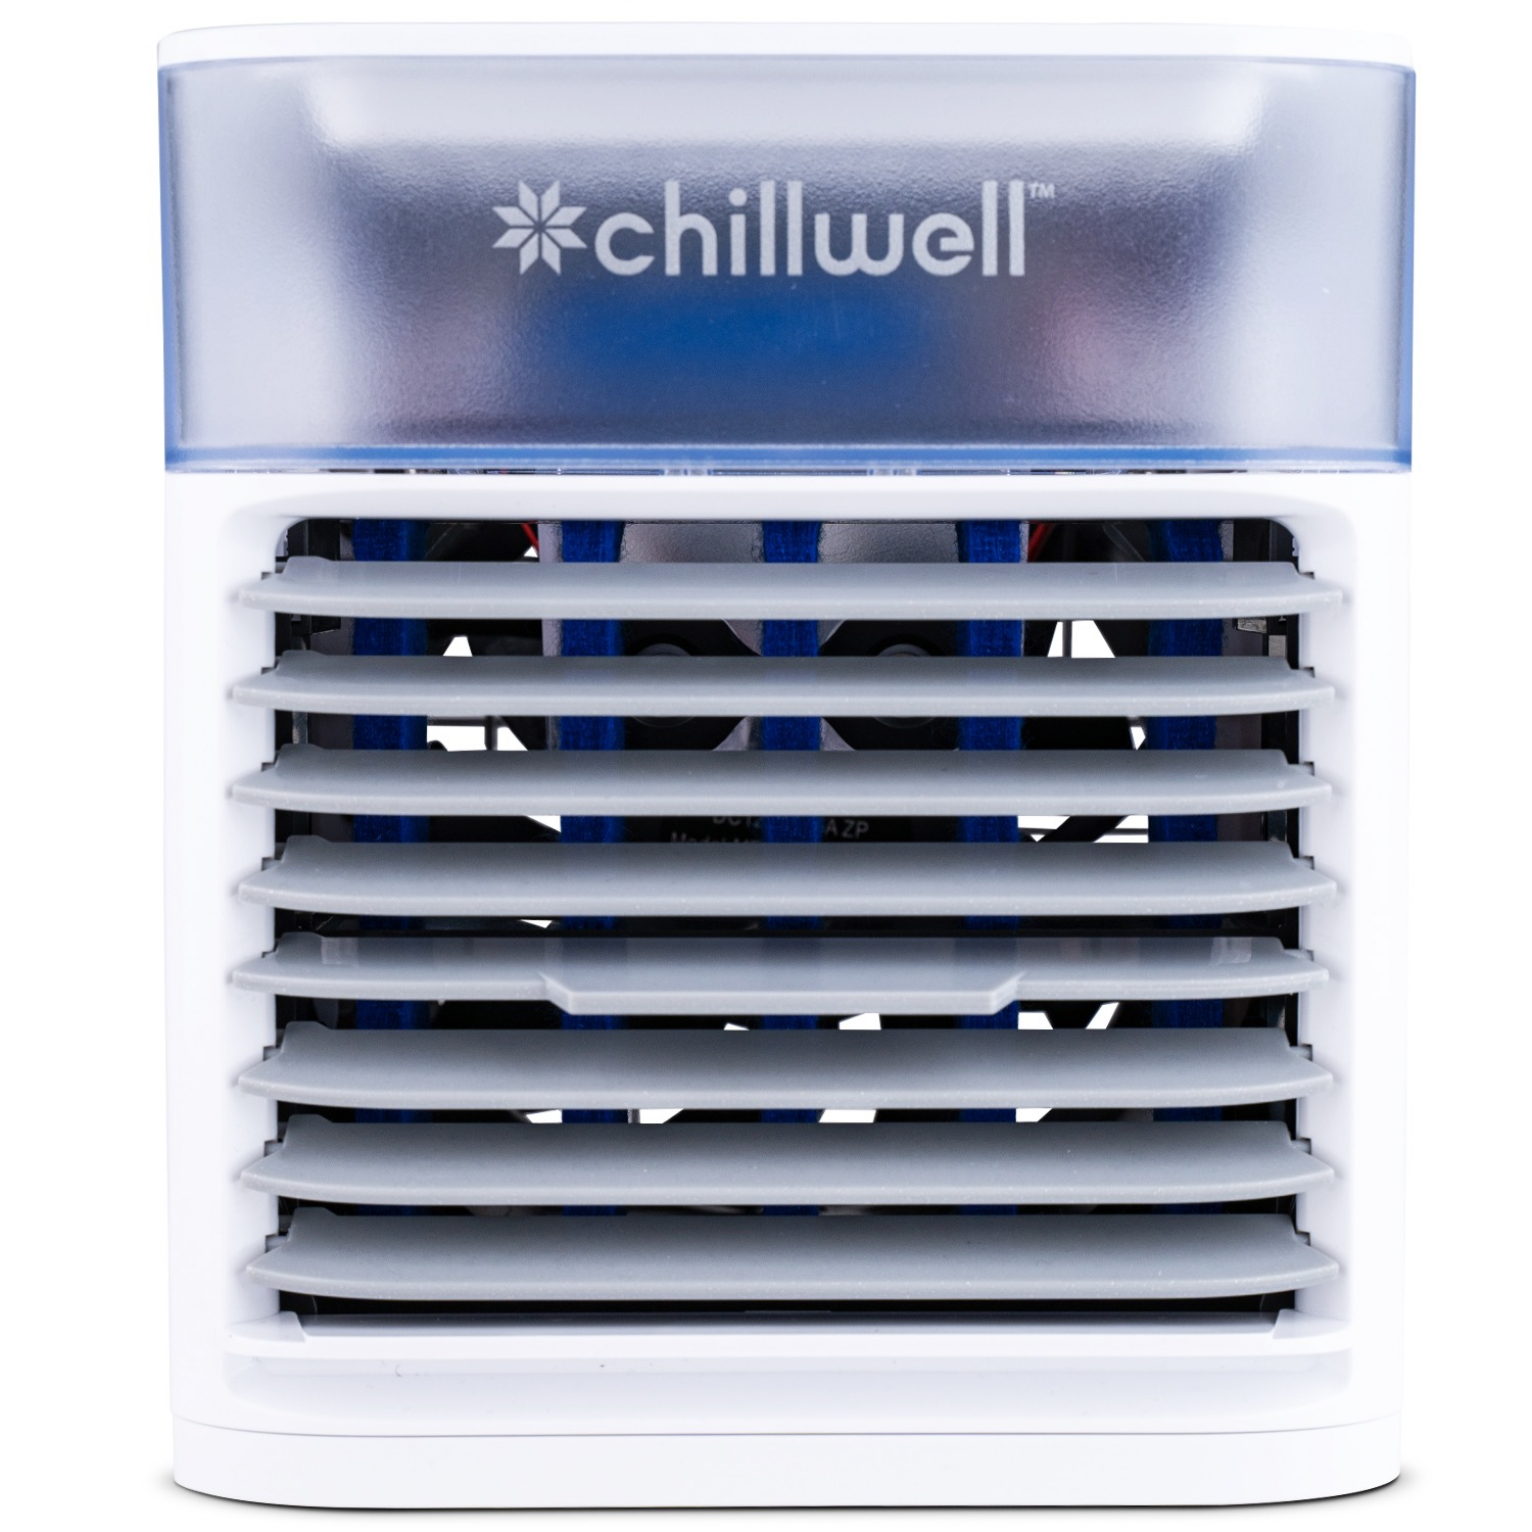 Is The Chillwell Ac Cooler Any Good